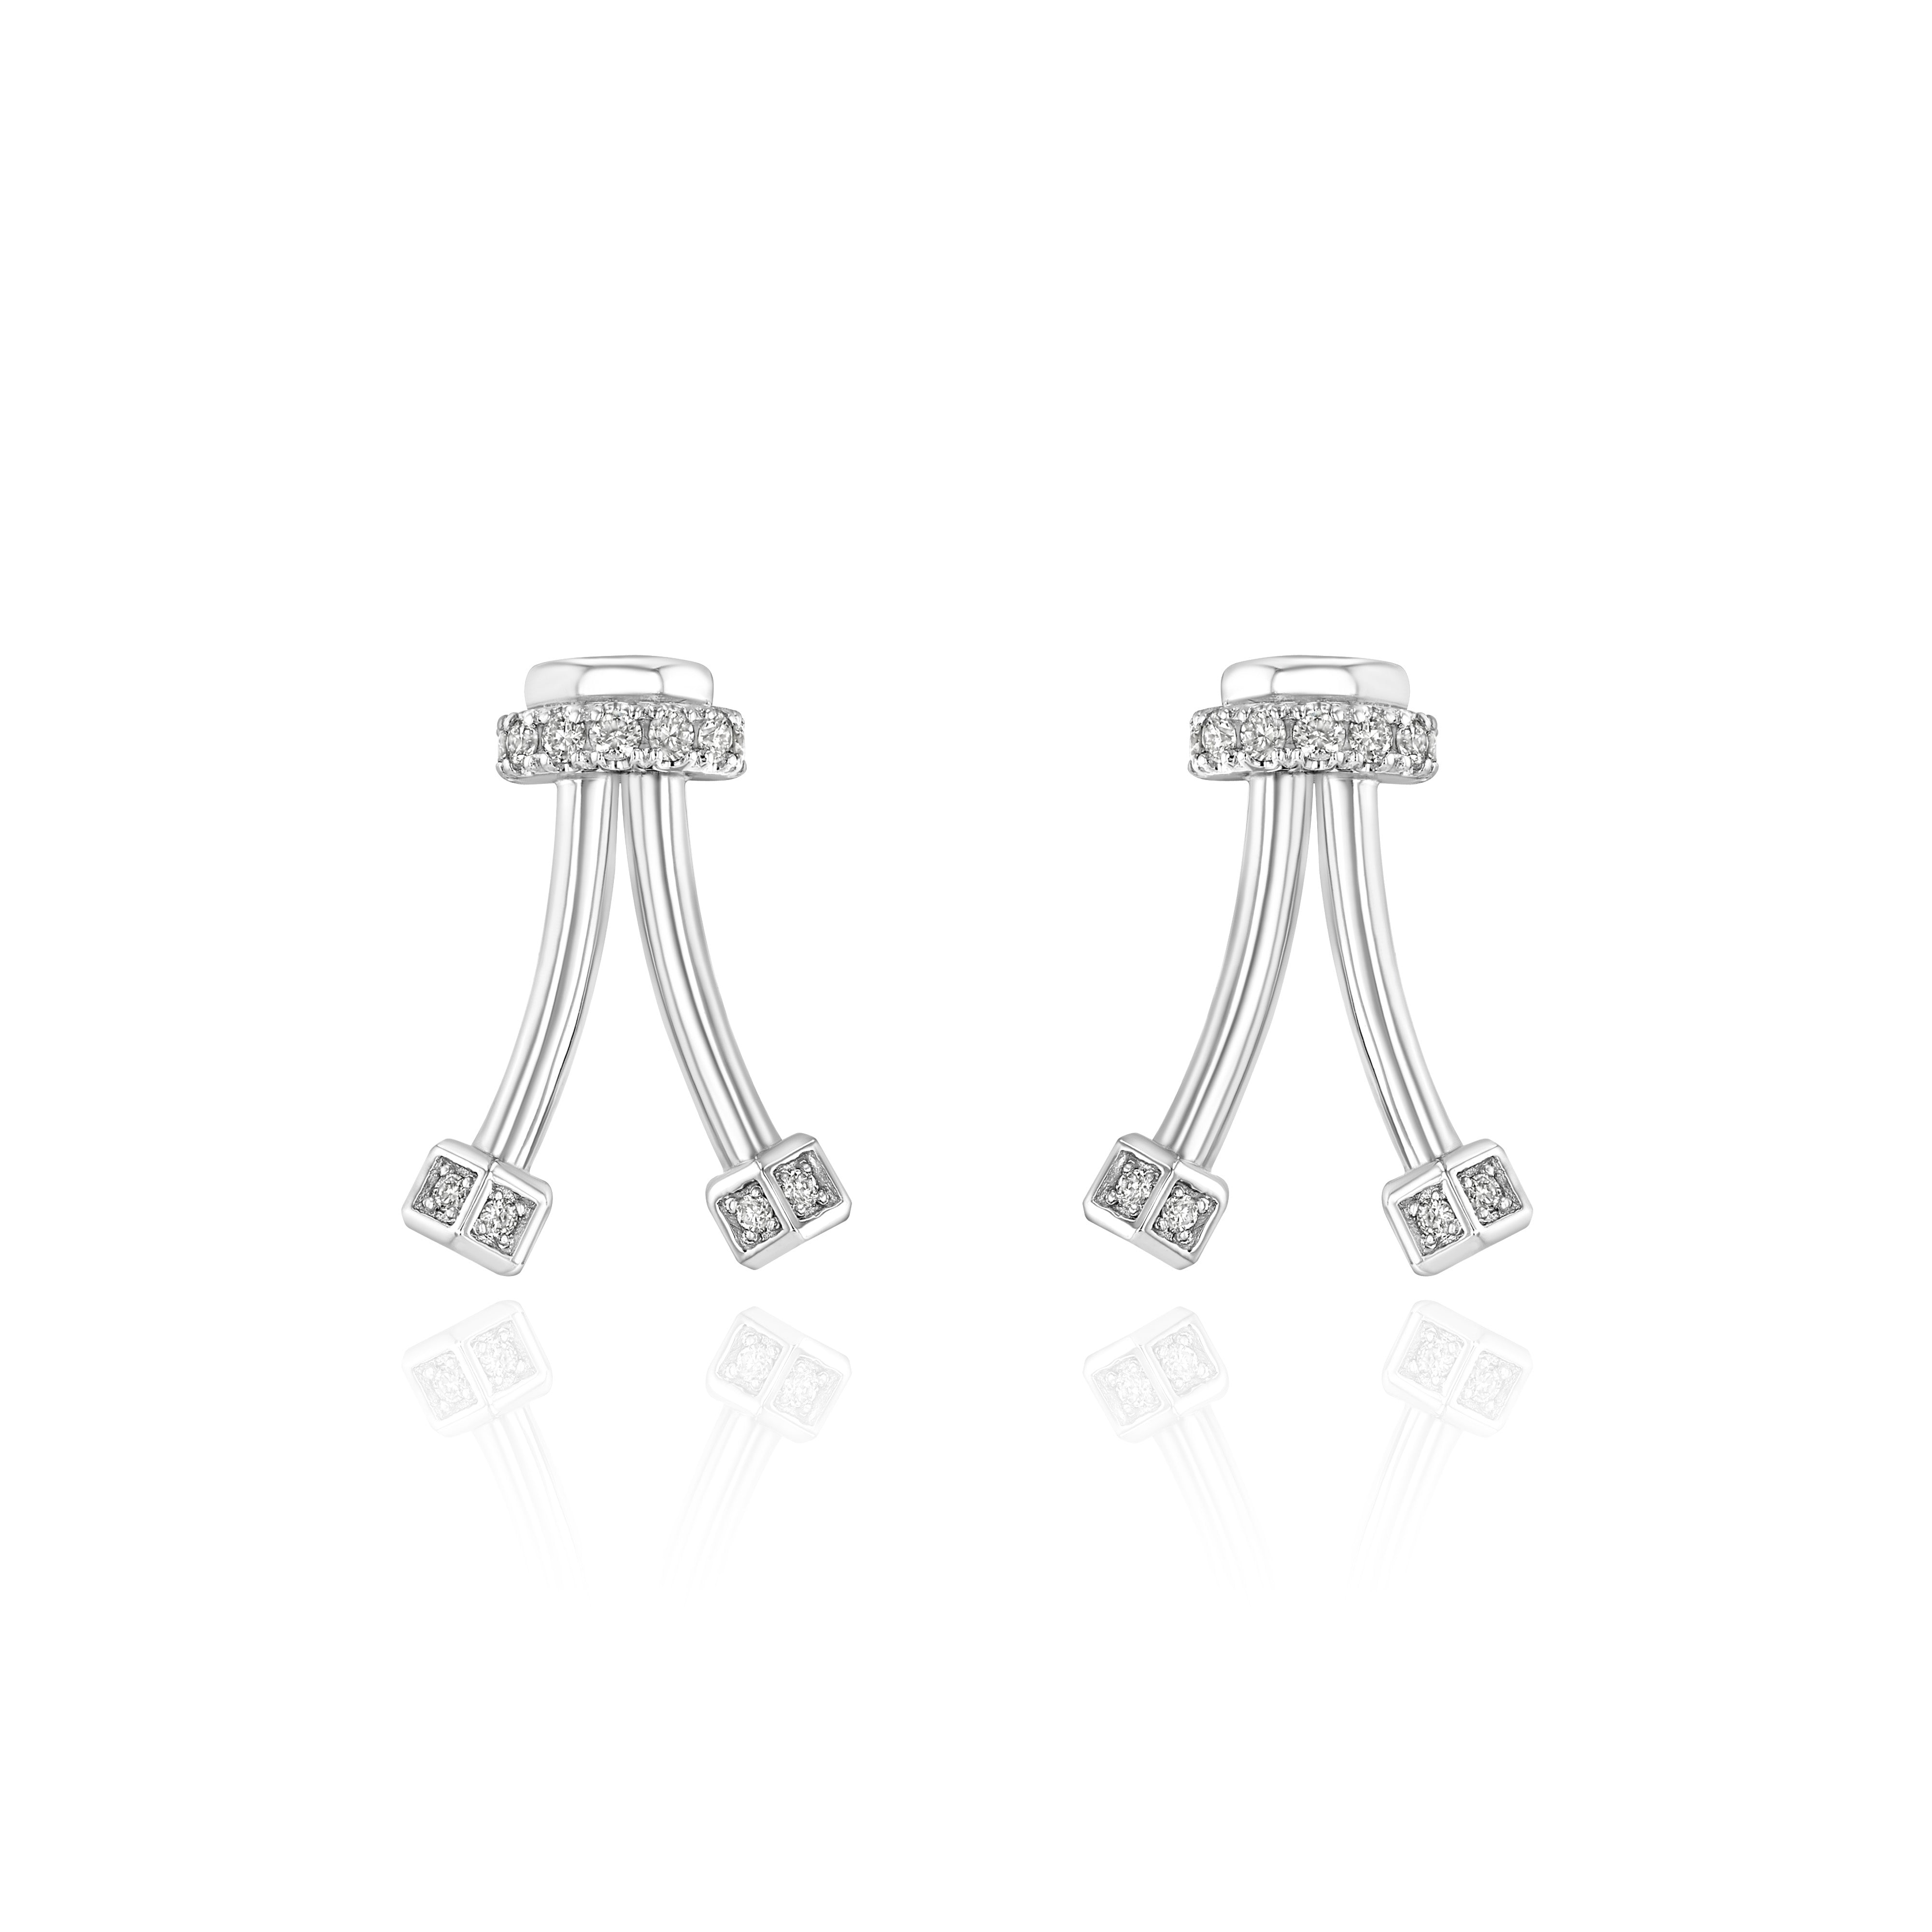 White Gold upside down V shaped Earrings with Diamond encrusted ends, Small